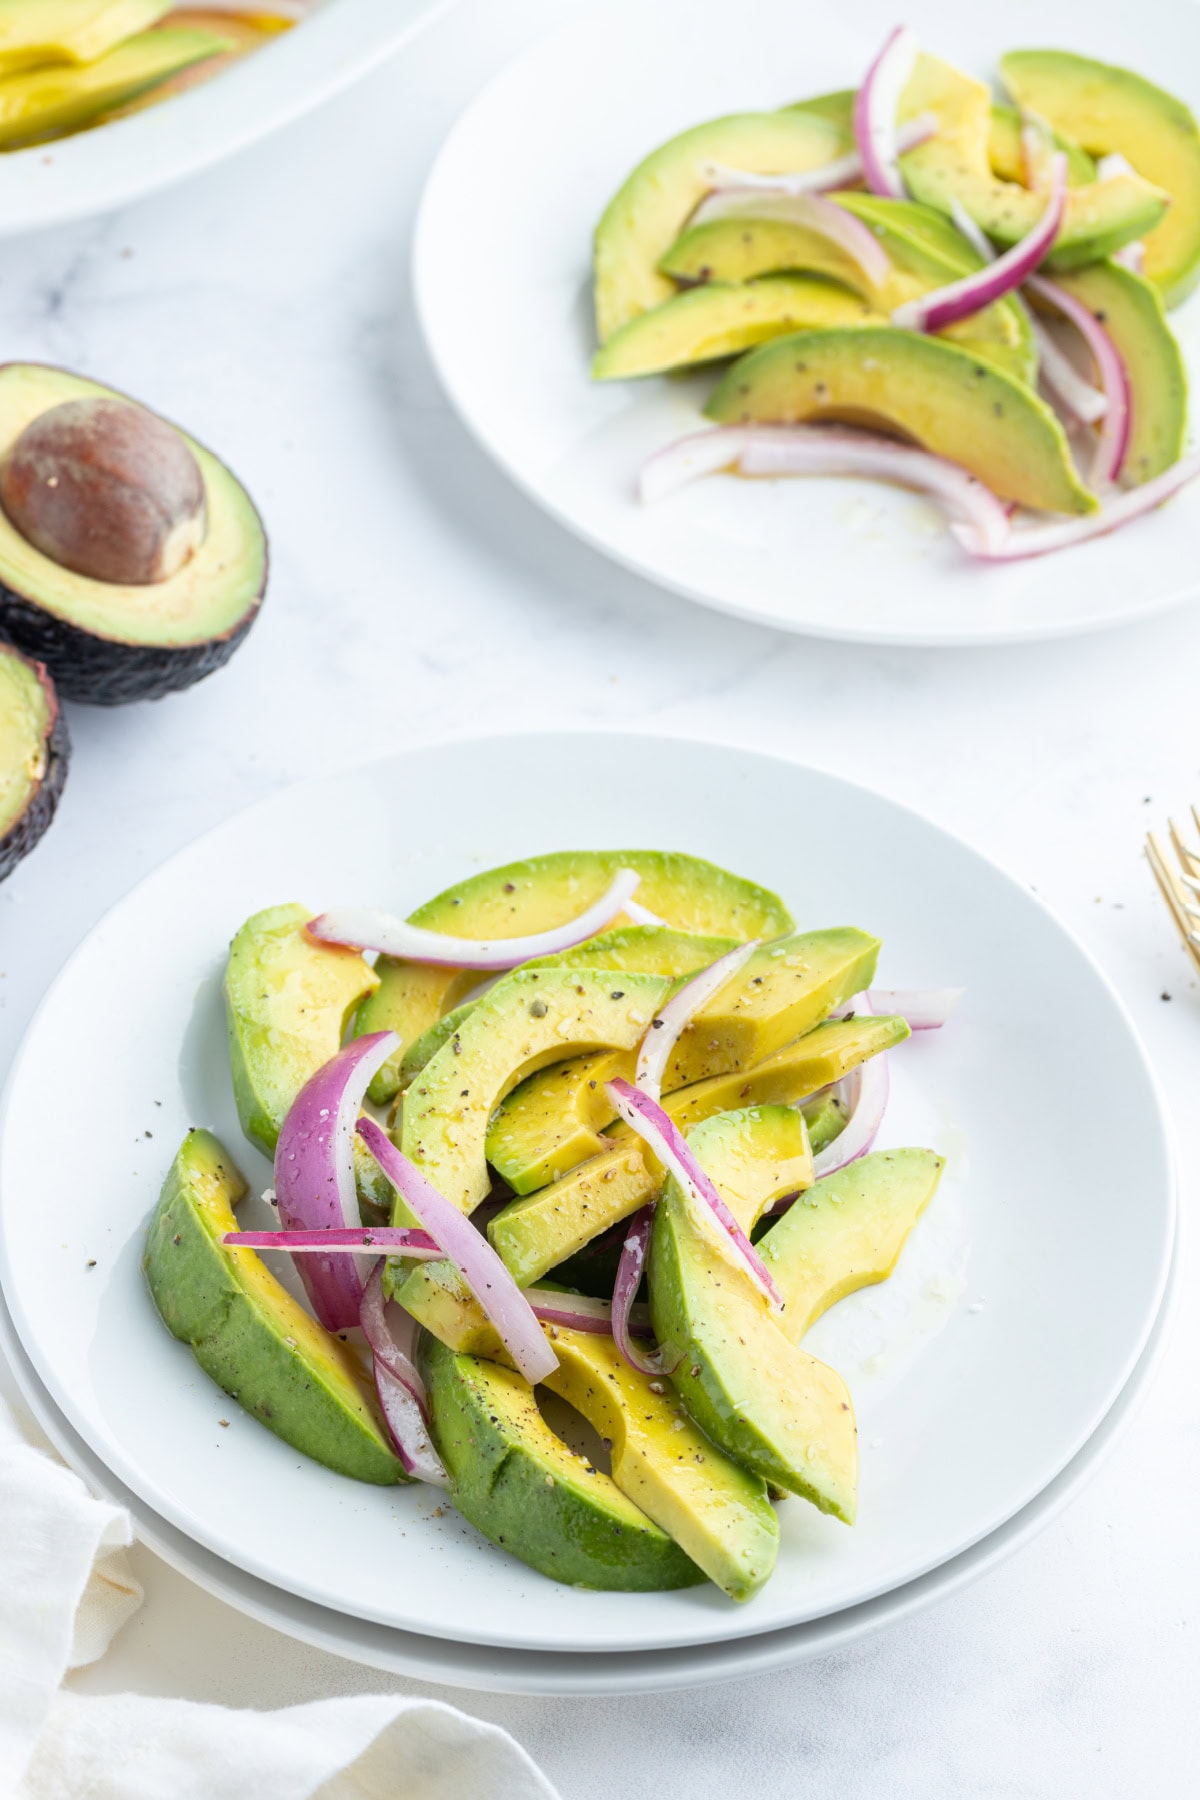 avocado and onion salad servings on plate